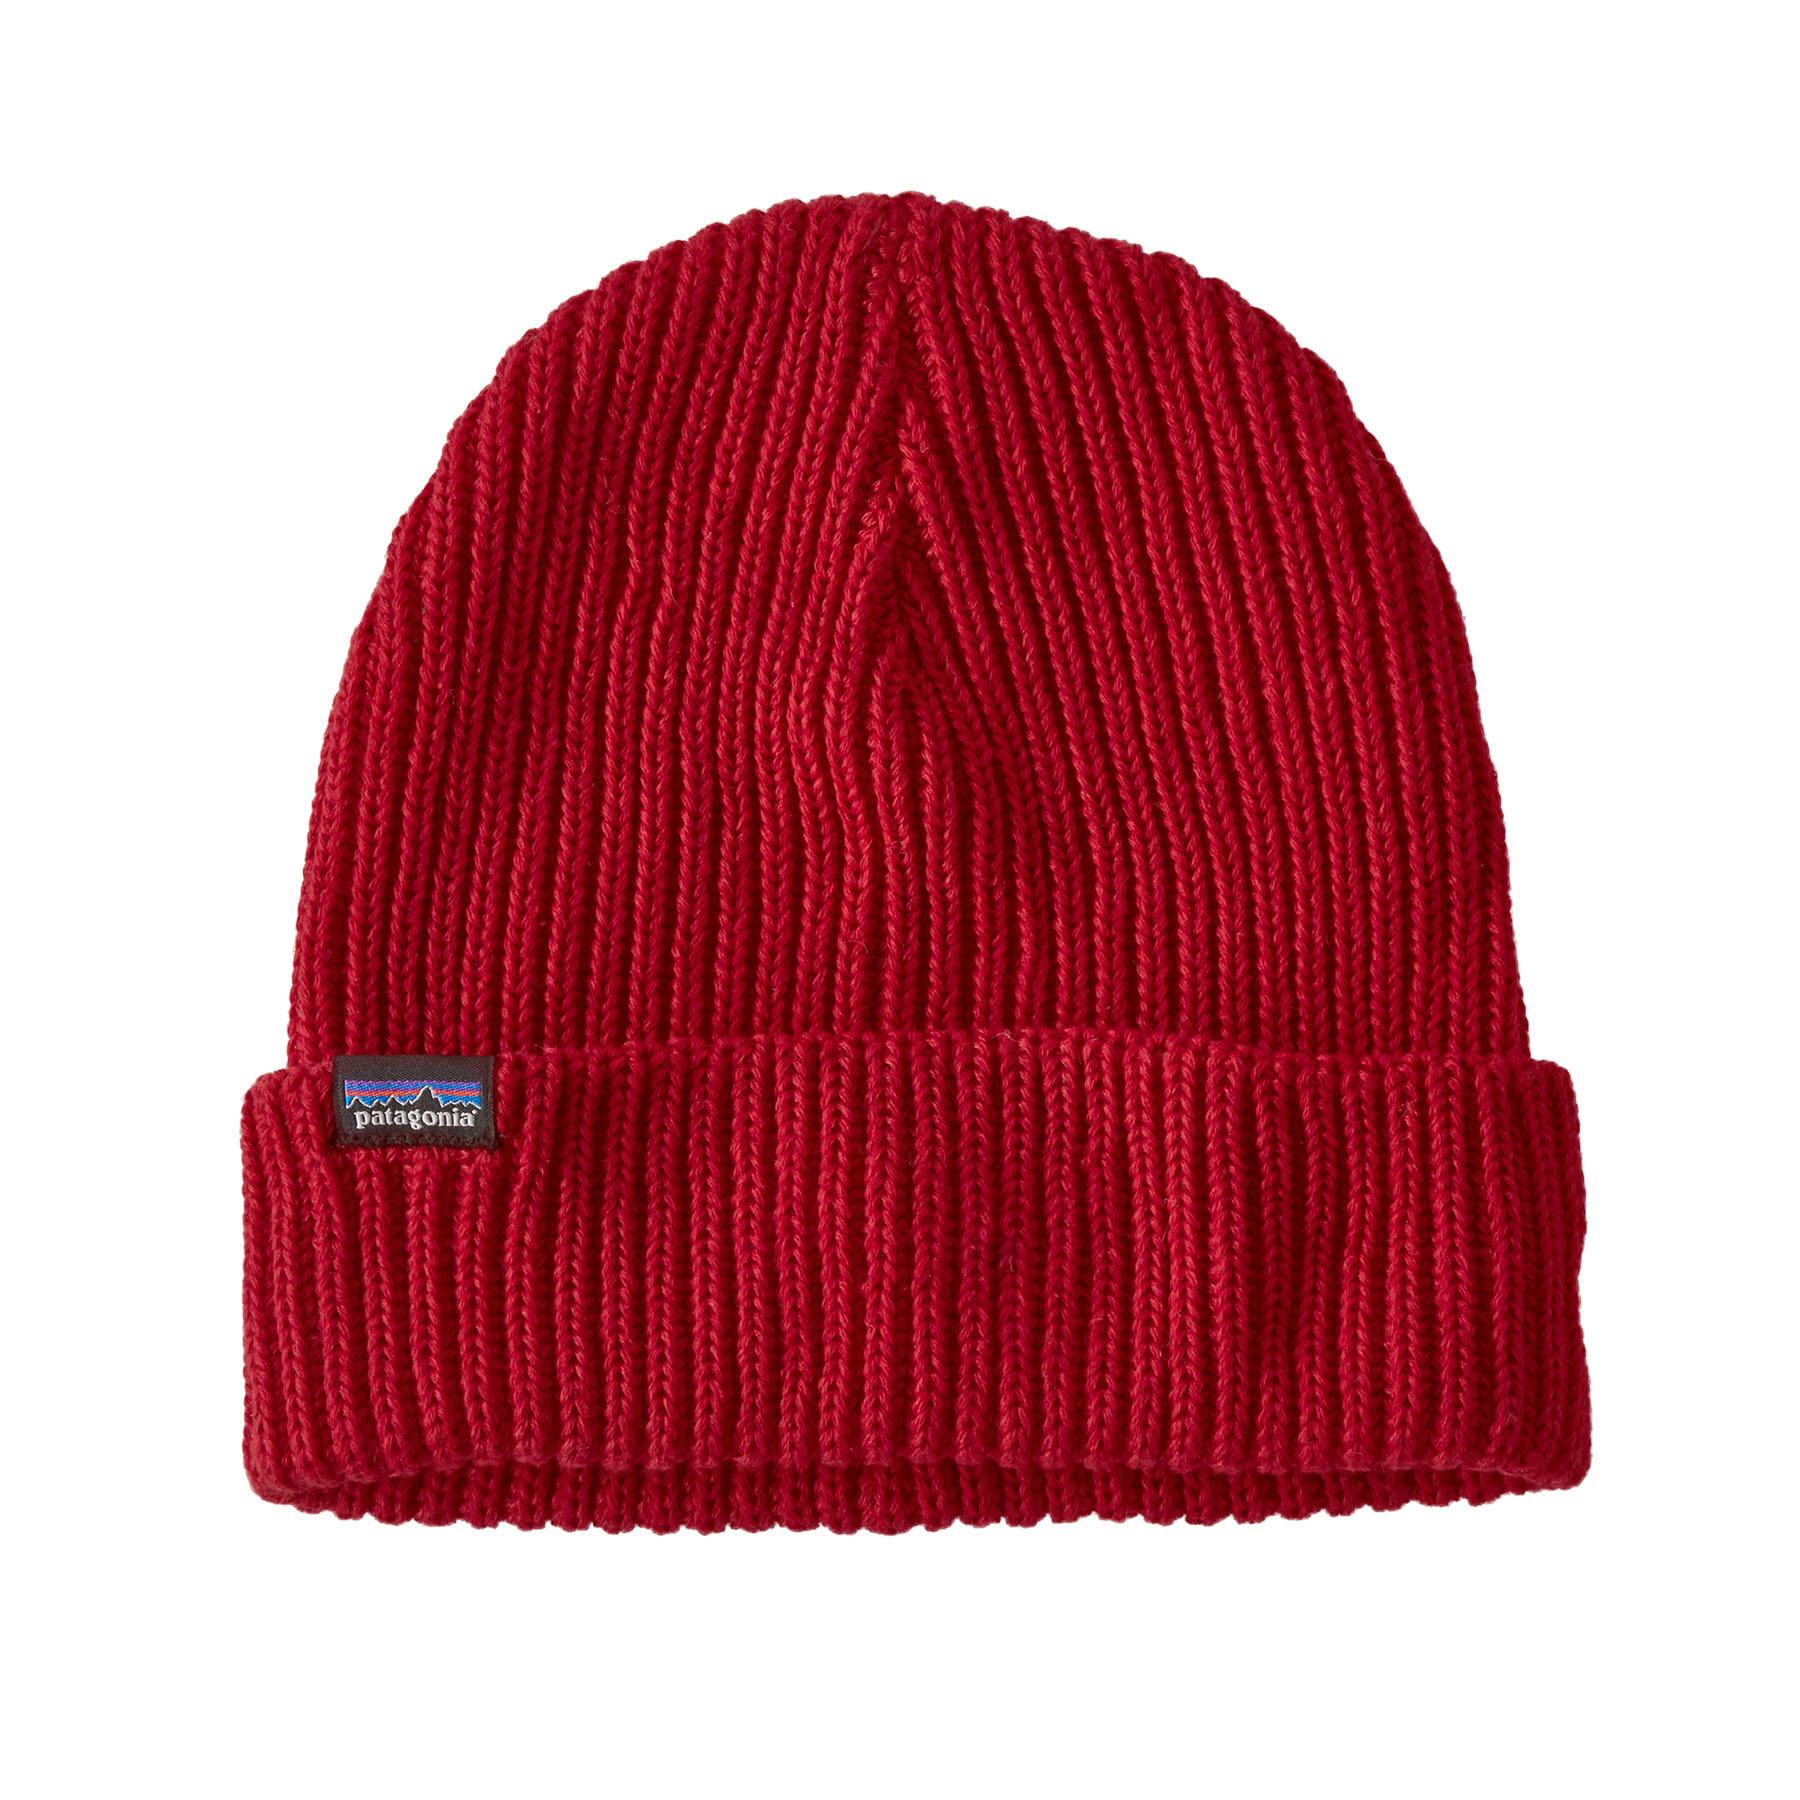 Fishermans Rolled Beanie (Touring Red)